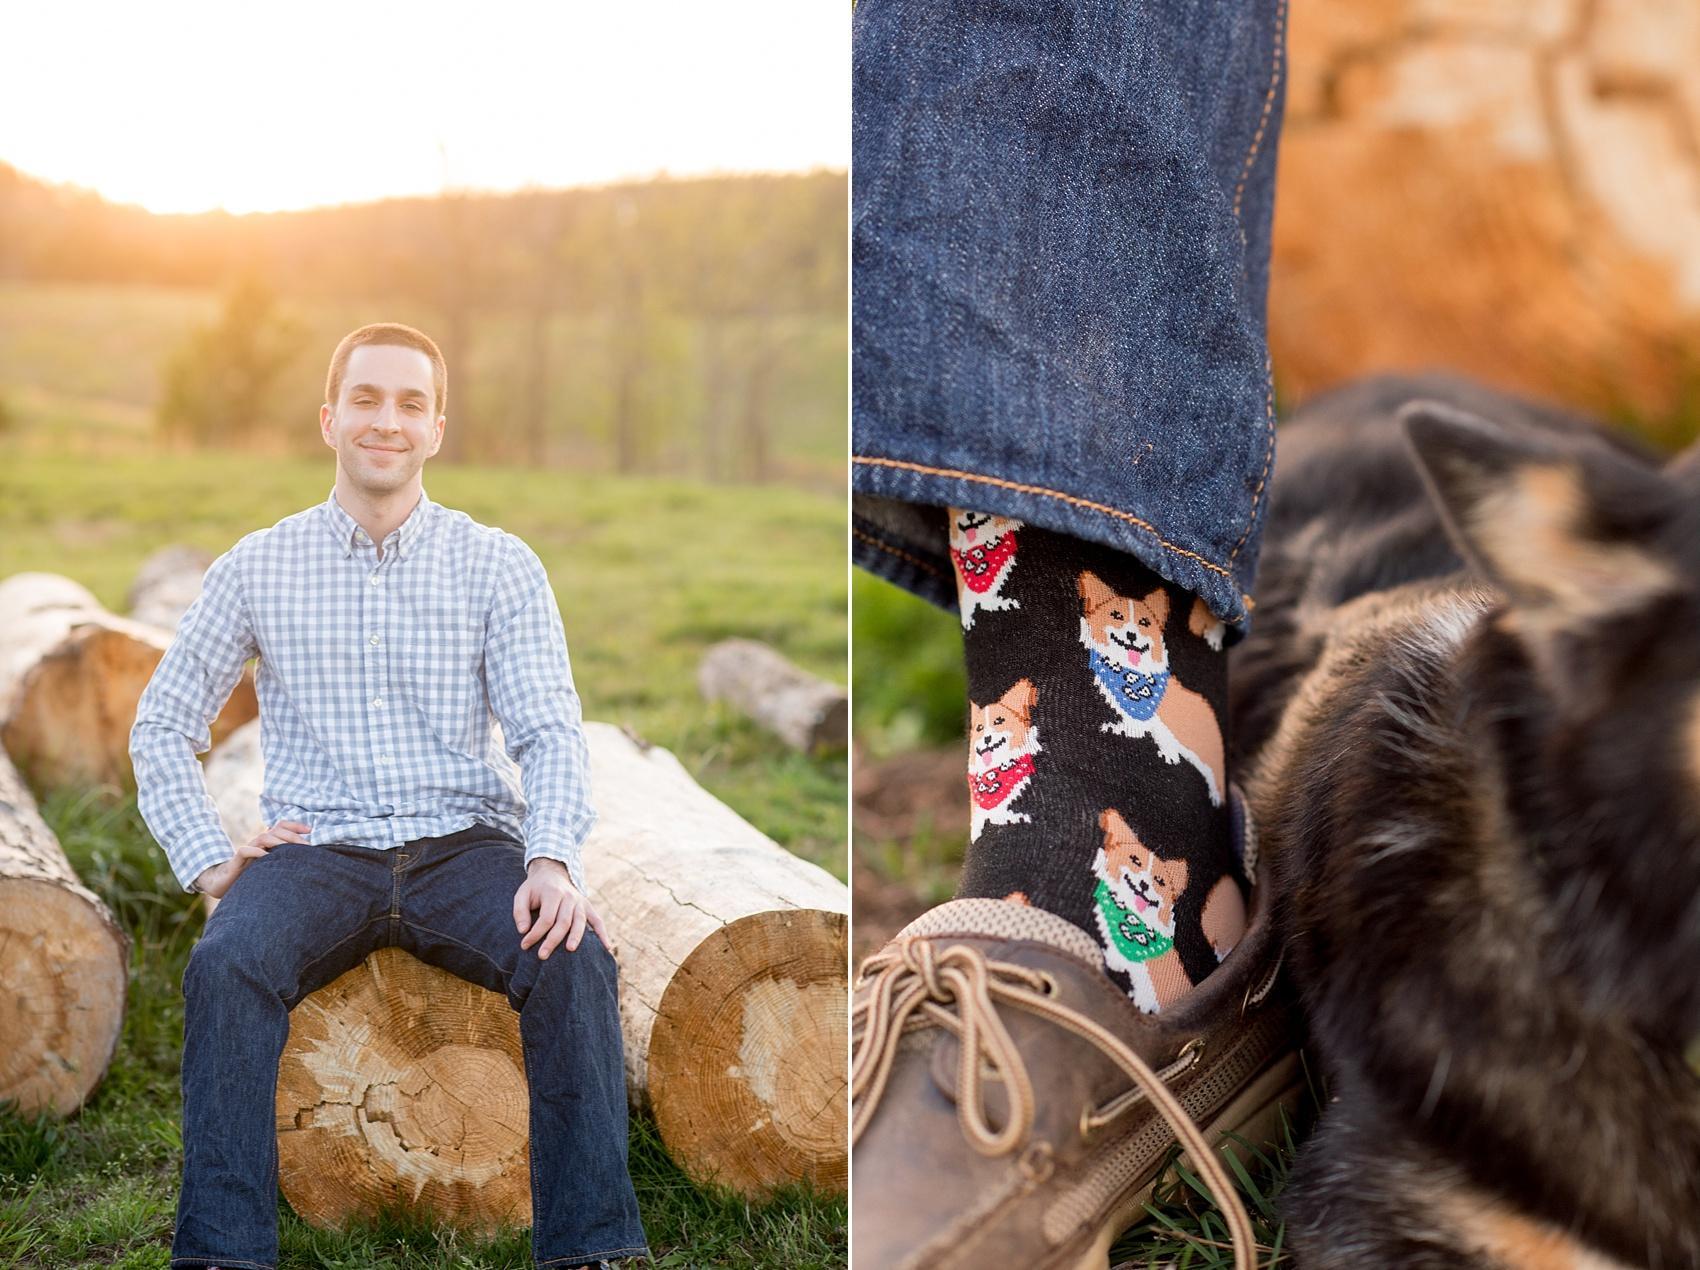 Raleigh farm engagement photos with Corgi dog and socks. Images by Mikkel Paige Photography.